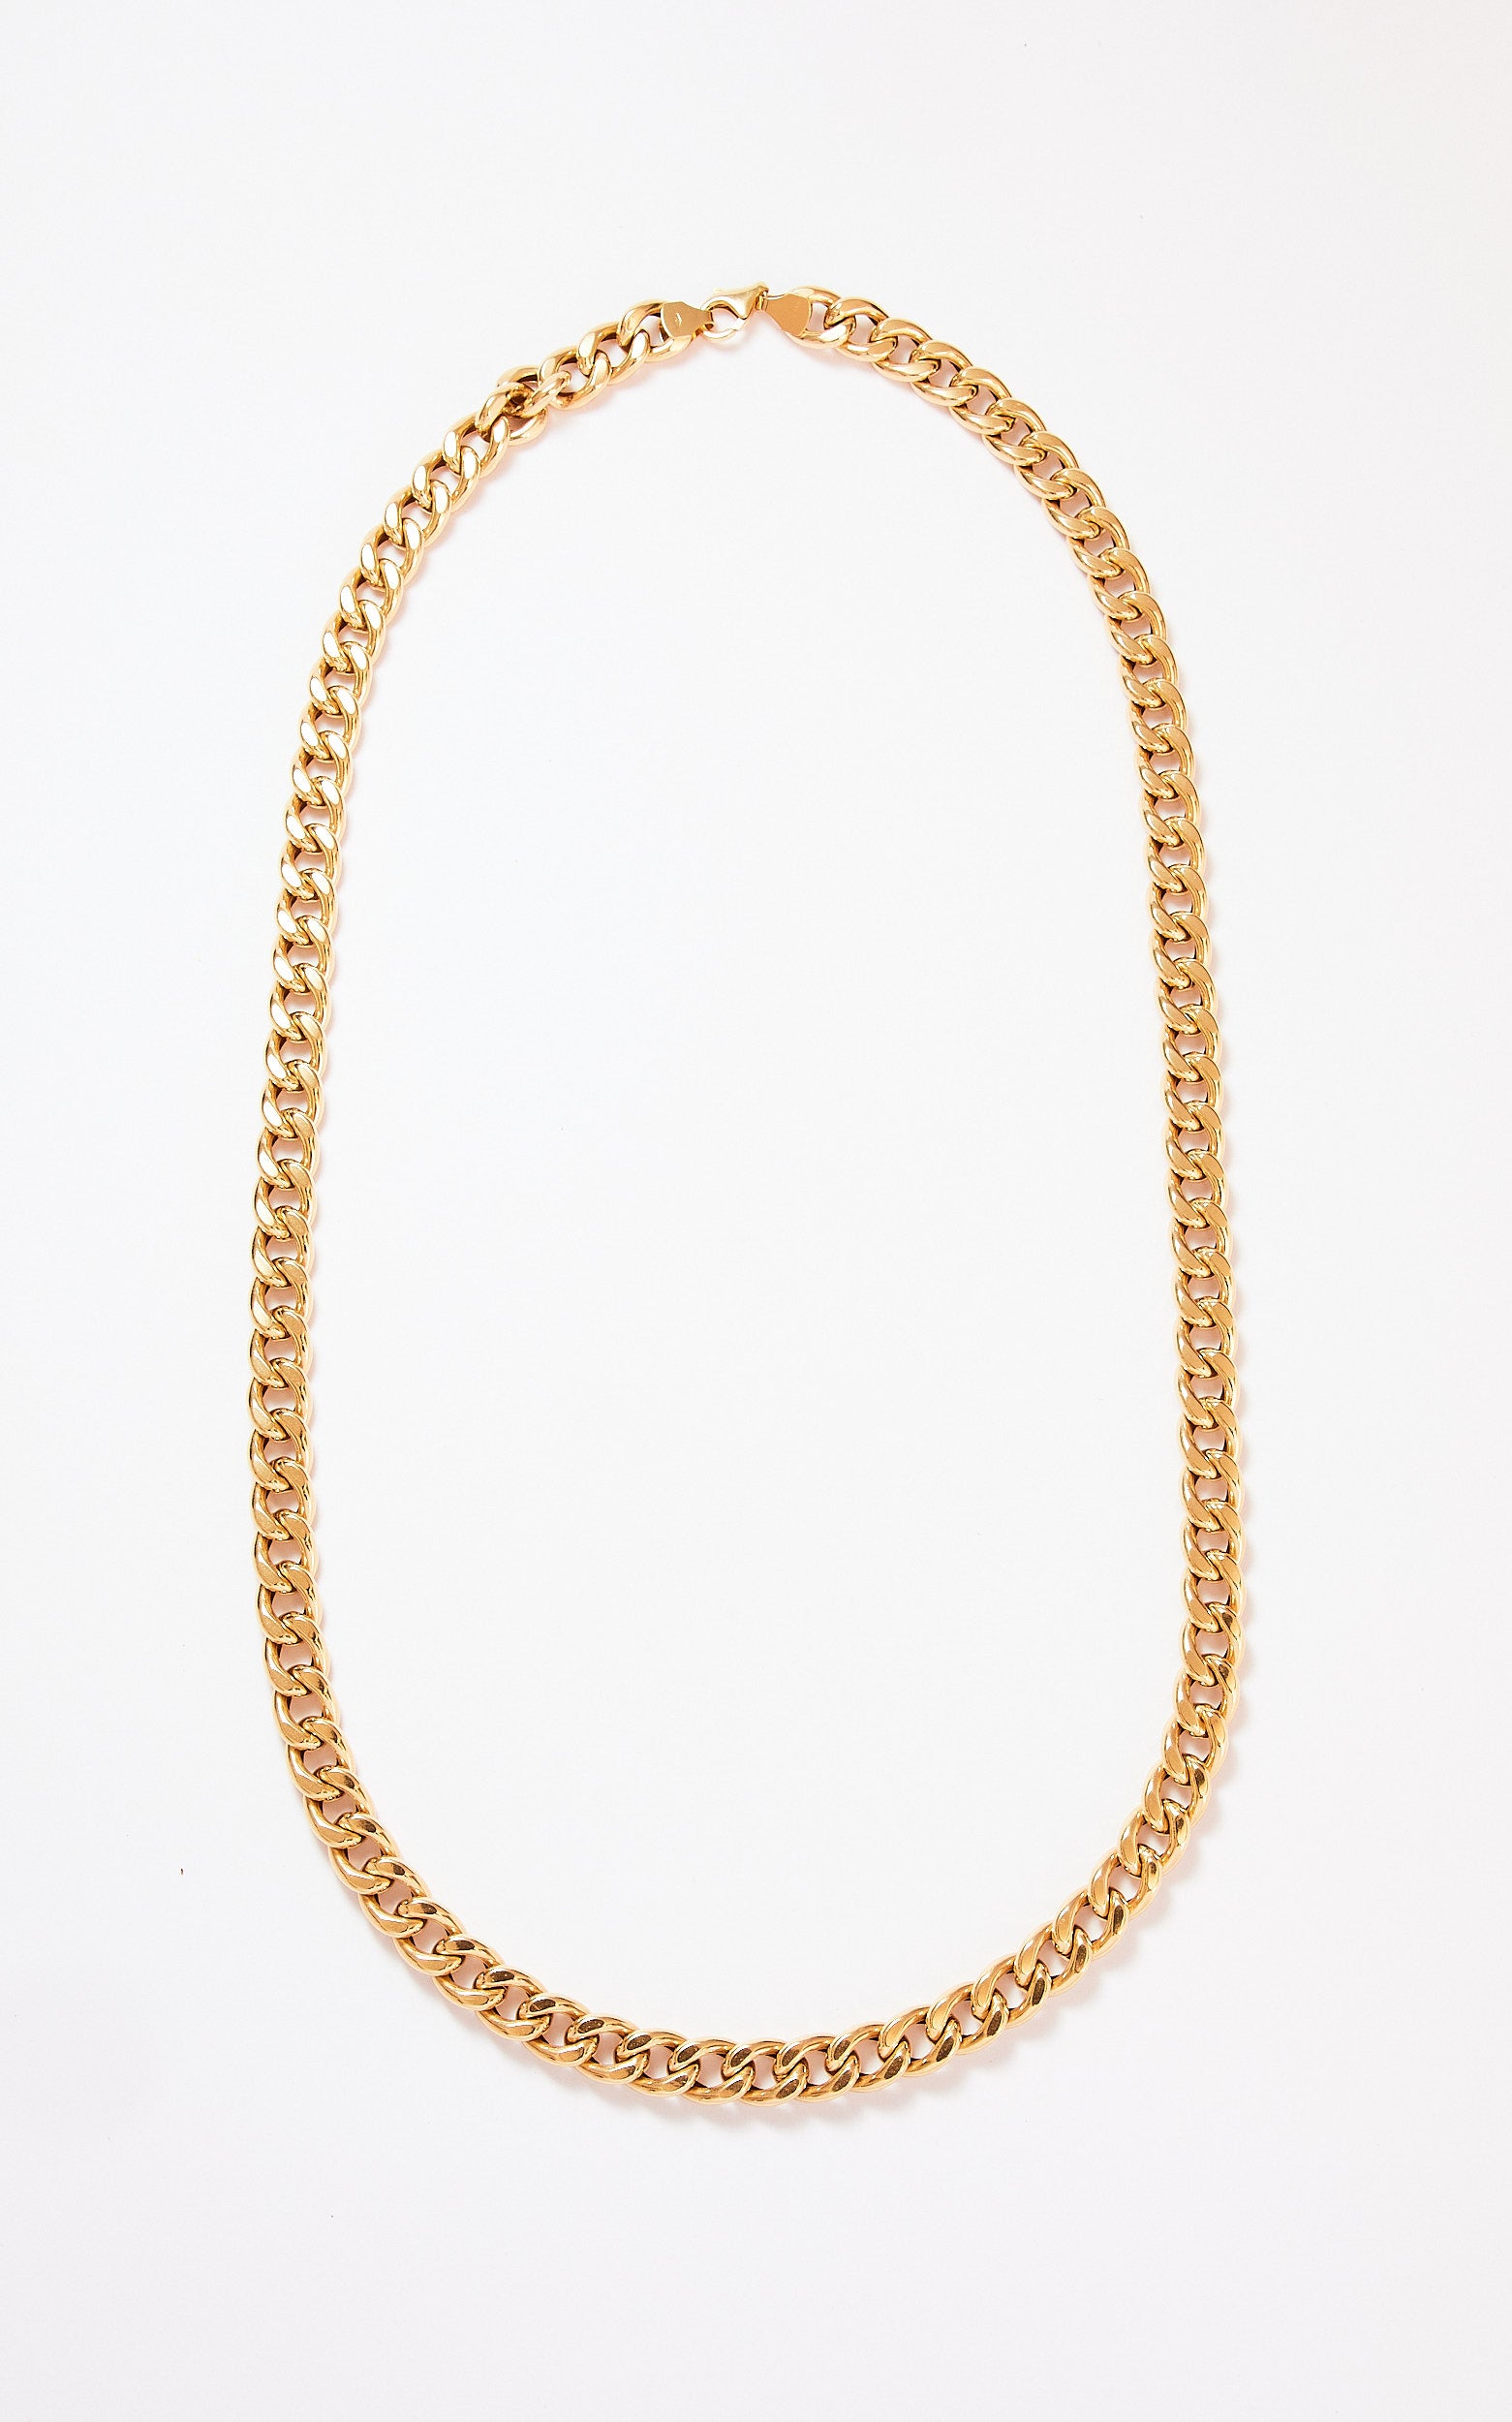 Vintage 18ct gold hollow curb chain